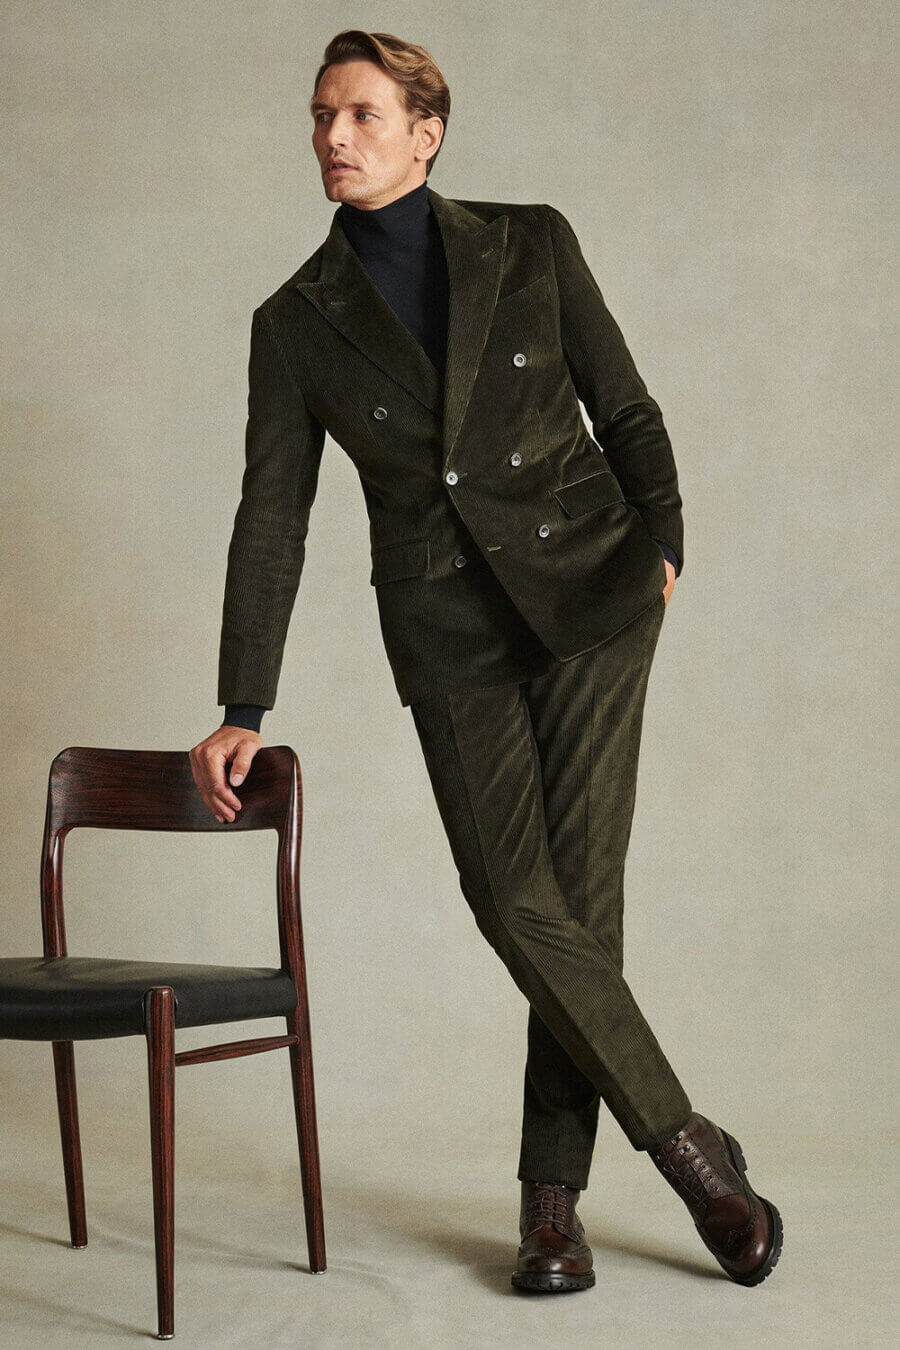 Men's double-breasted green corduroy suit, black turtleneck and brown leather boots outfit